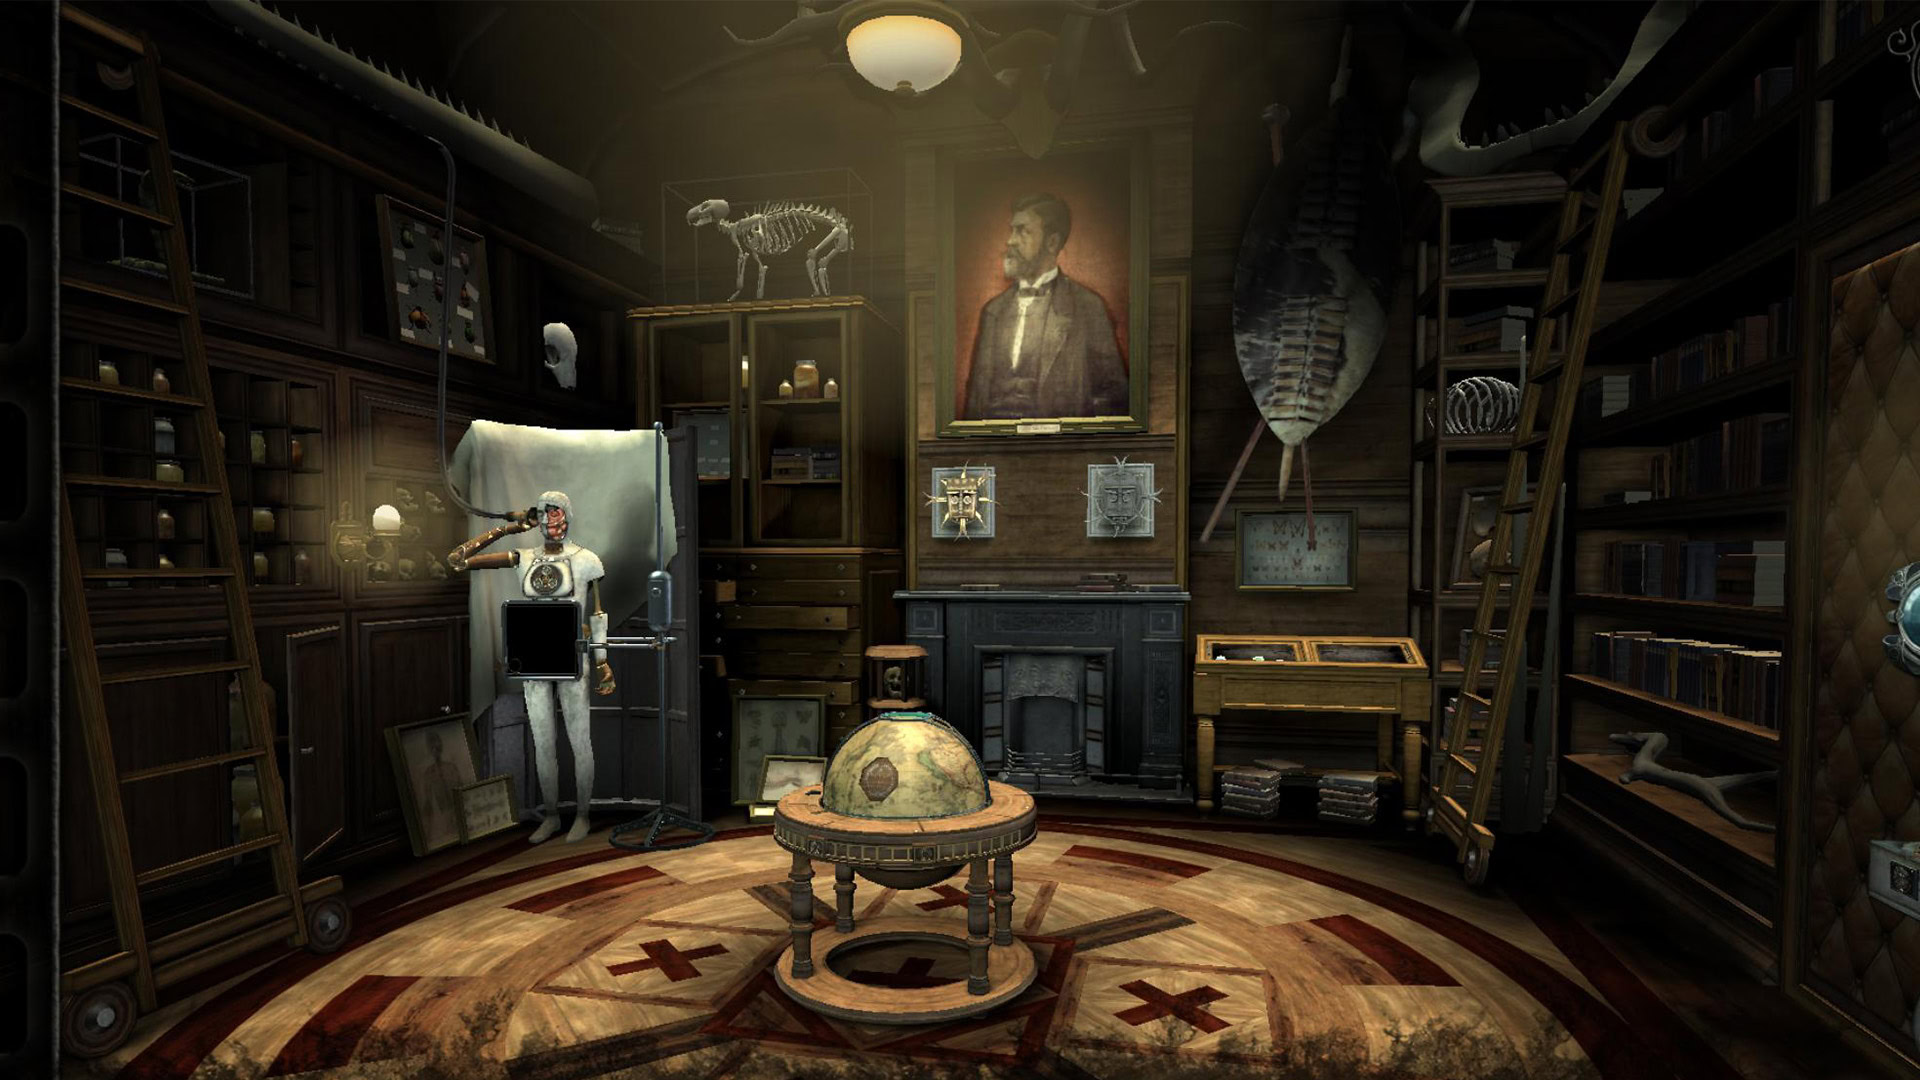 15 Best PC escape room games on Steam